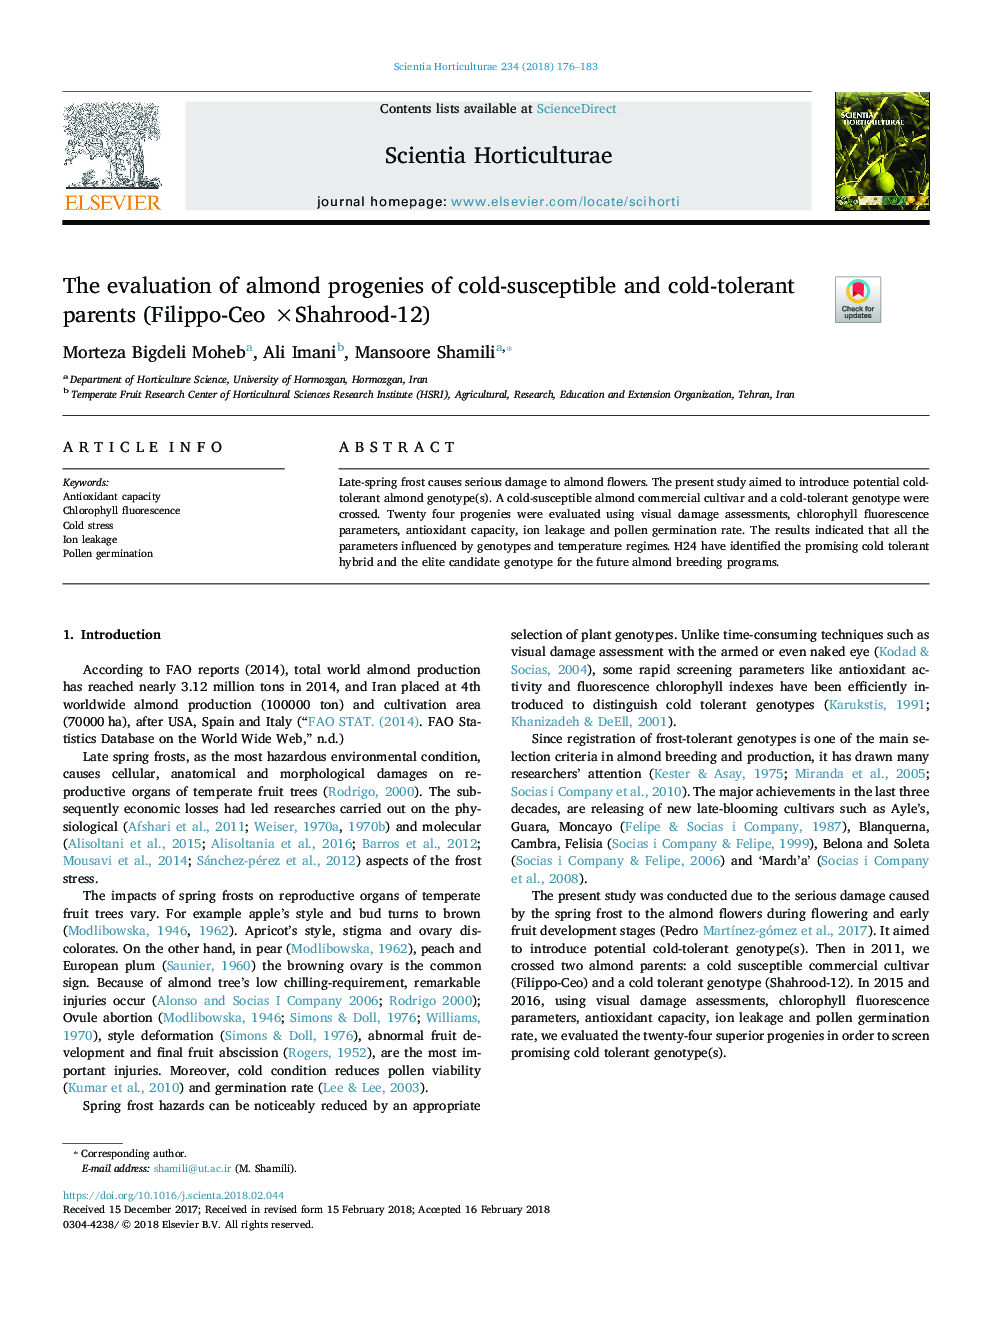 The evaluation of almond progenies of cold-susceptible and cold-tolerant parents (Filippo-Ceo ÃShahrood-12)